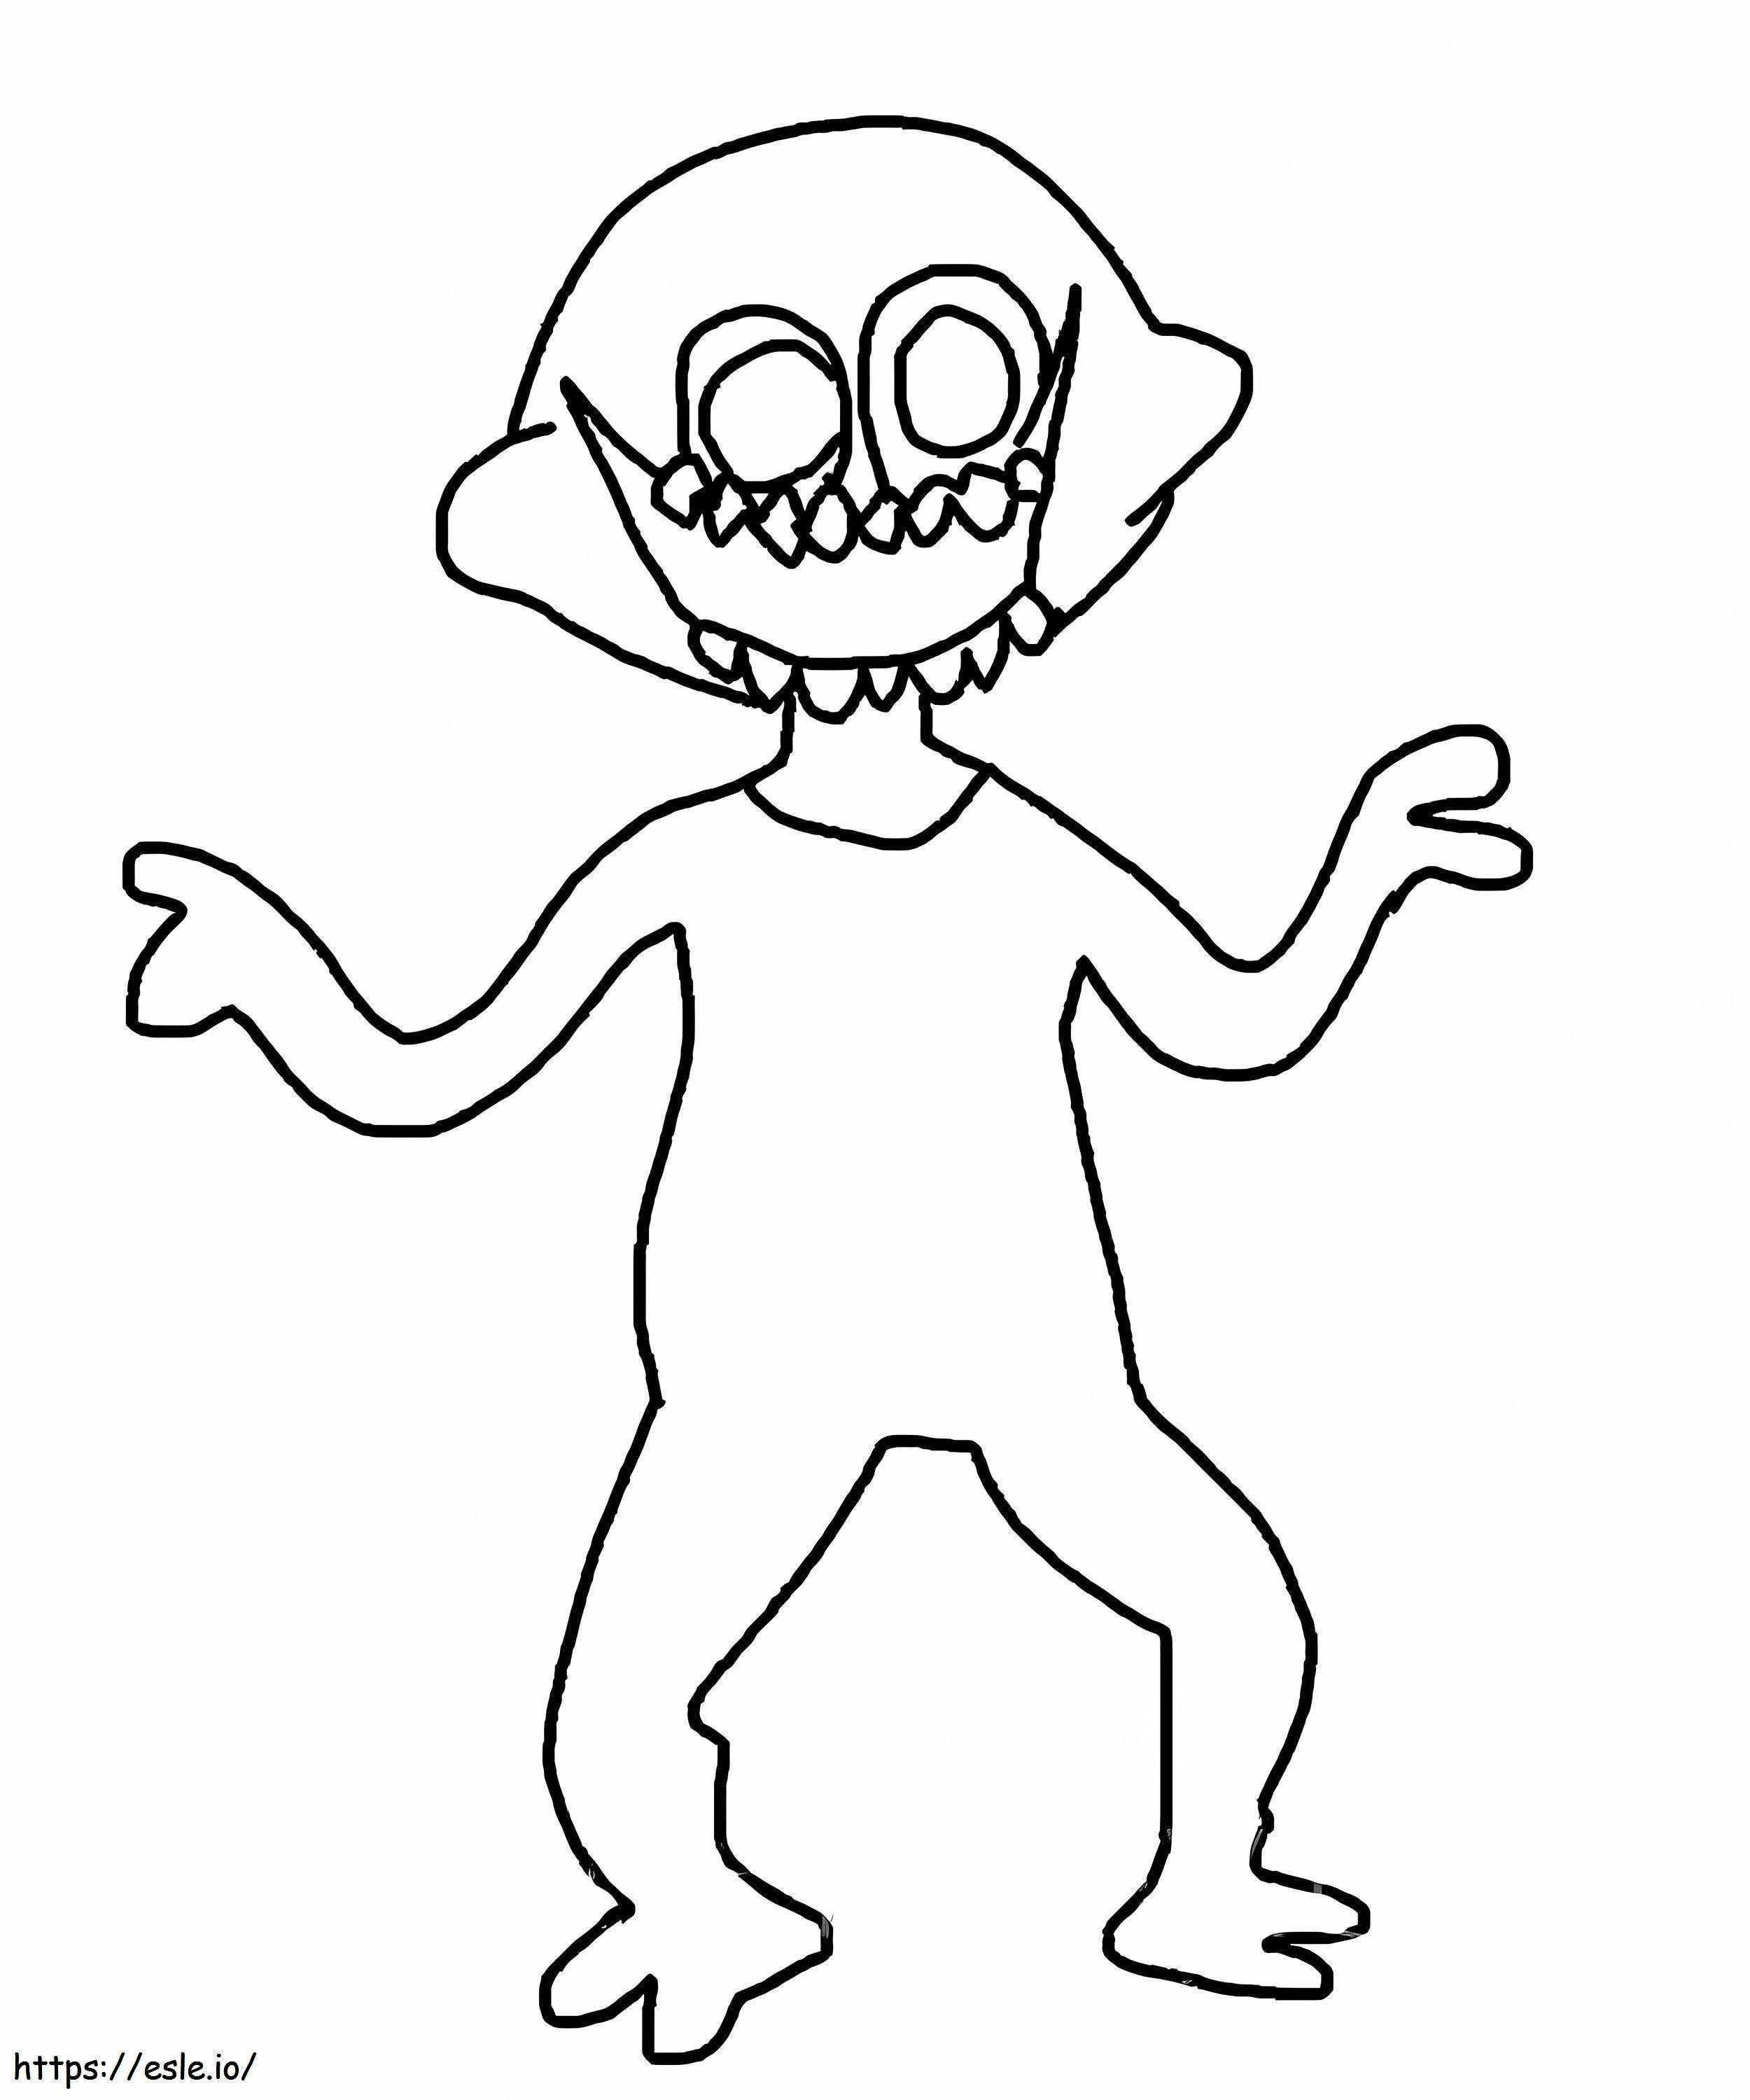 The Monsters Friday Night Funkin coloring page